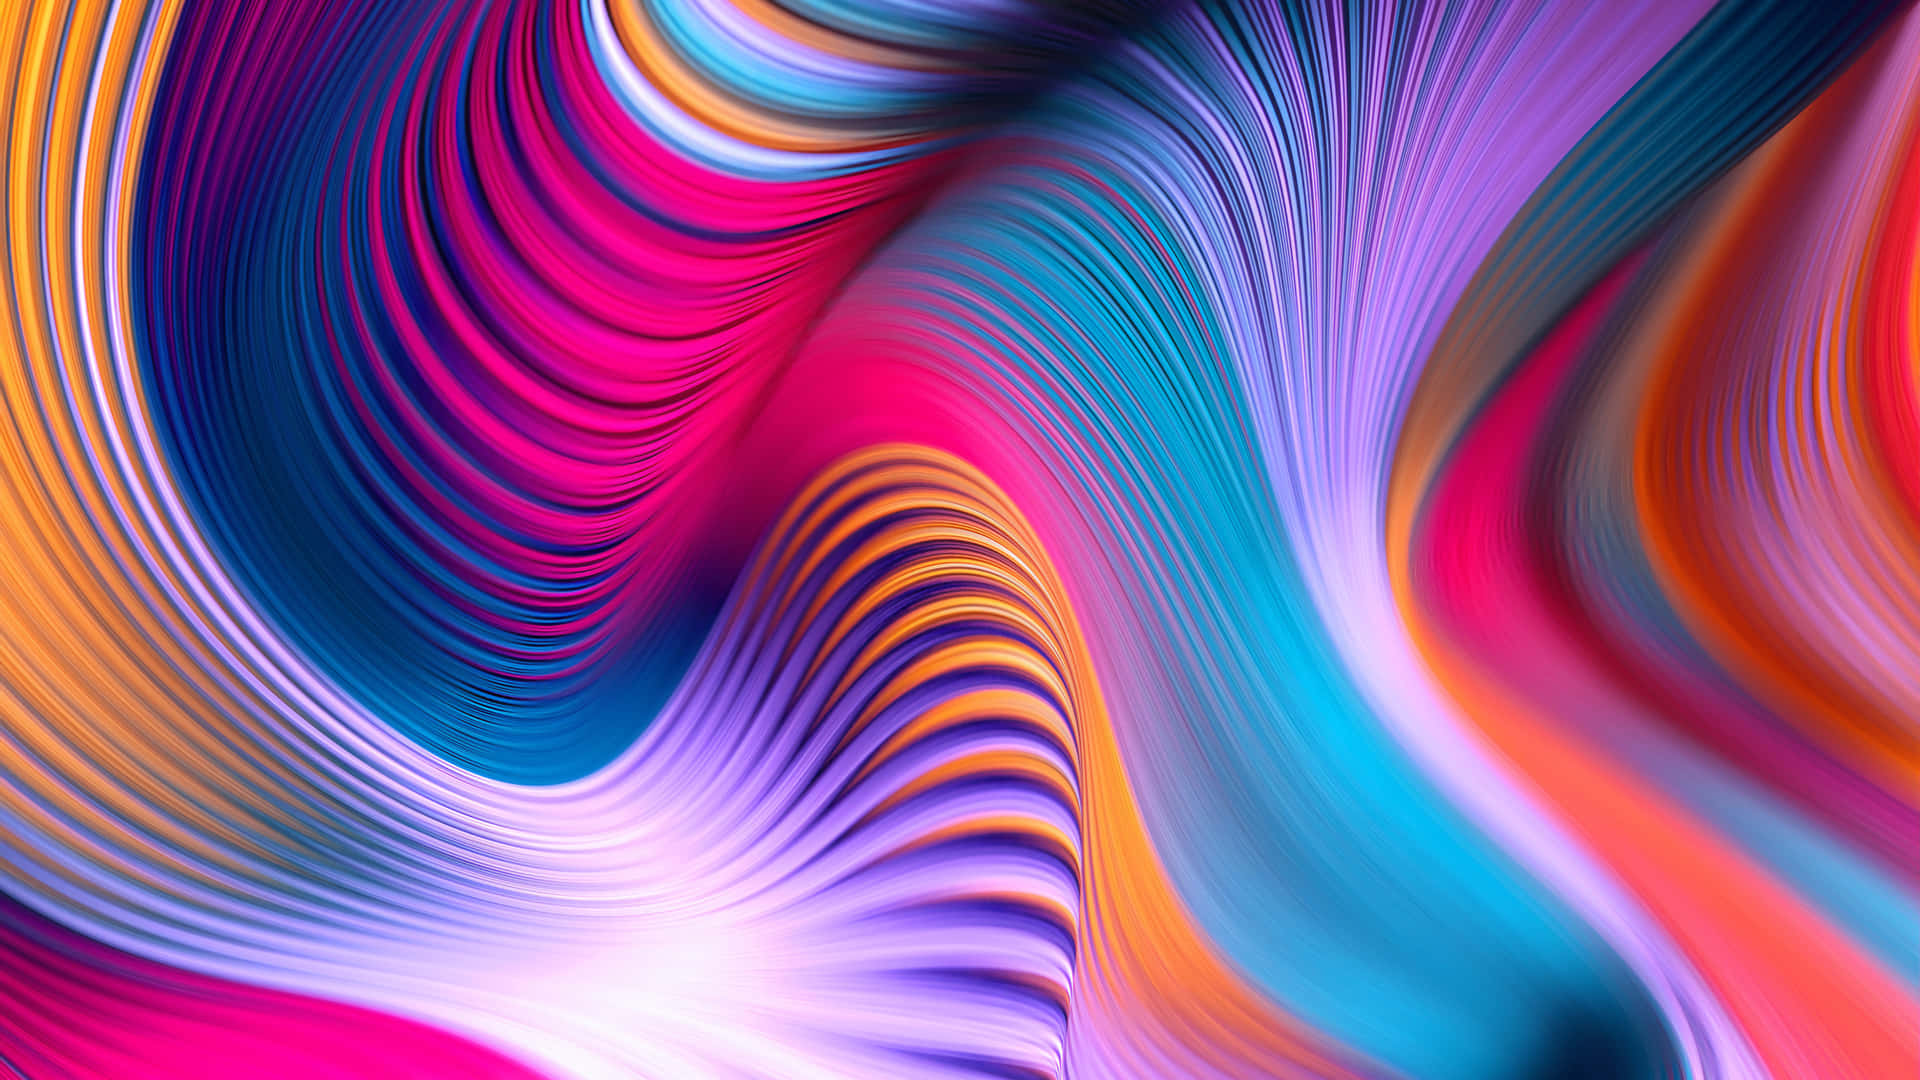 Vibrant Colorful Abstract Art